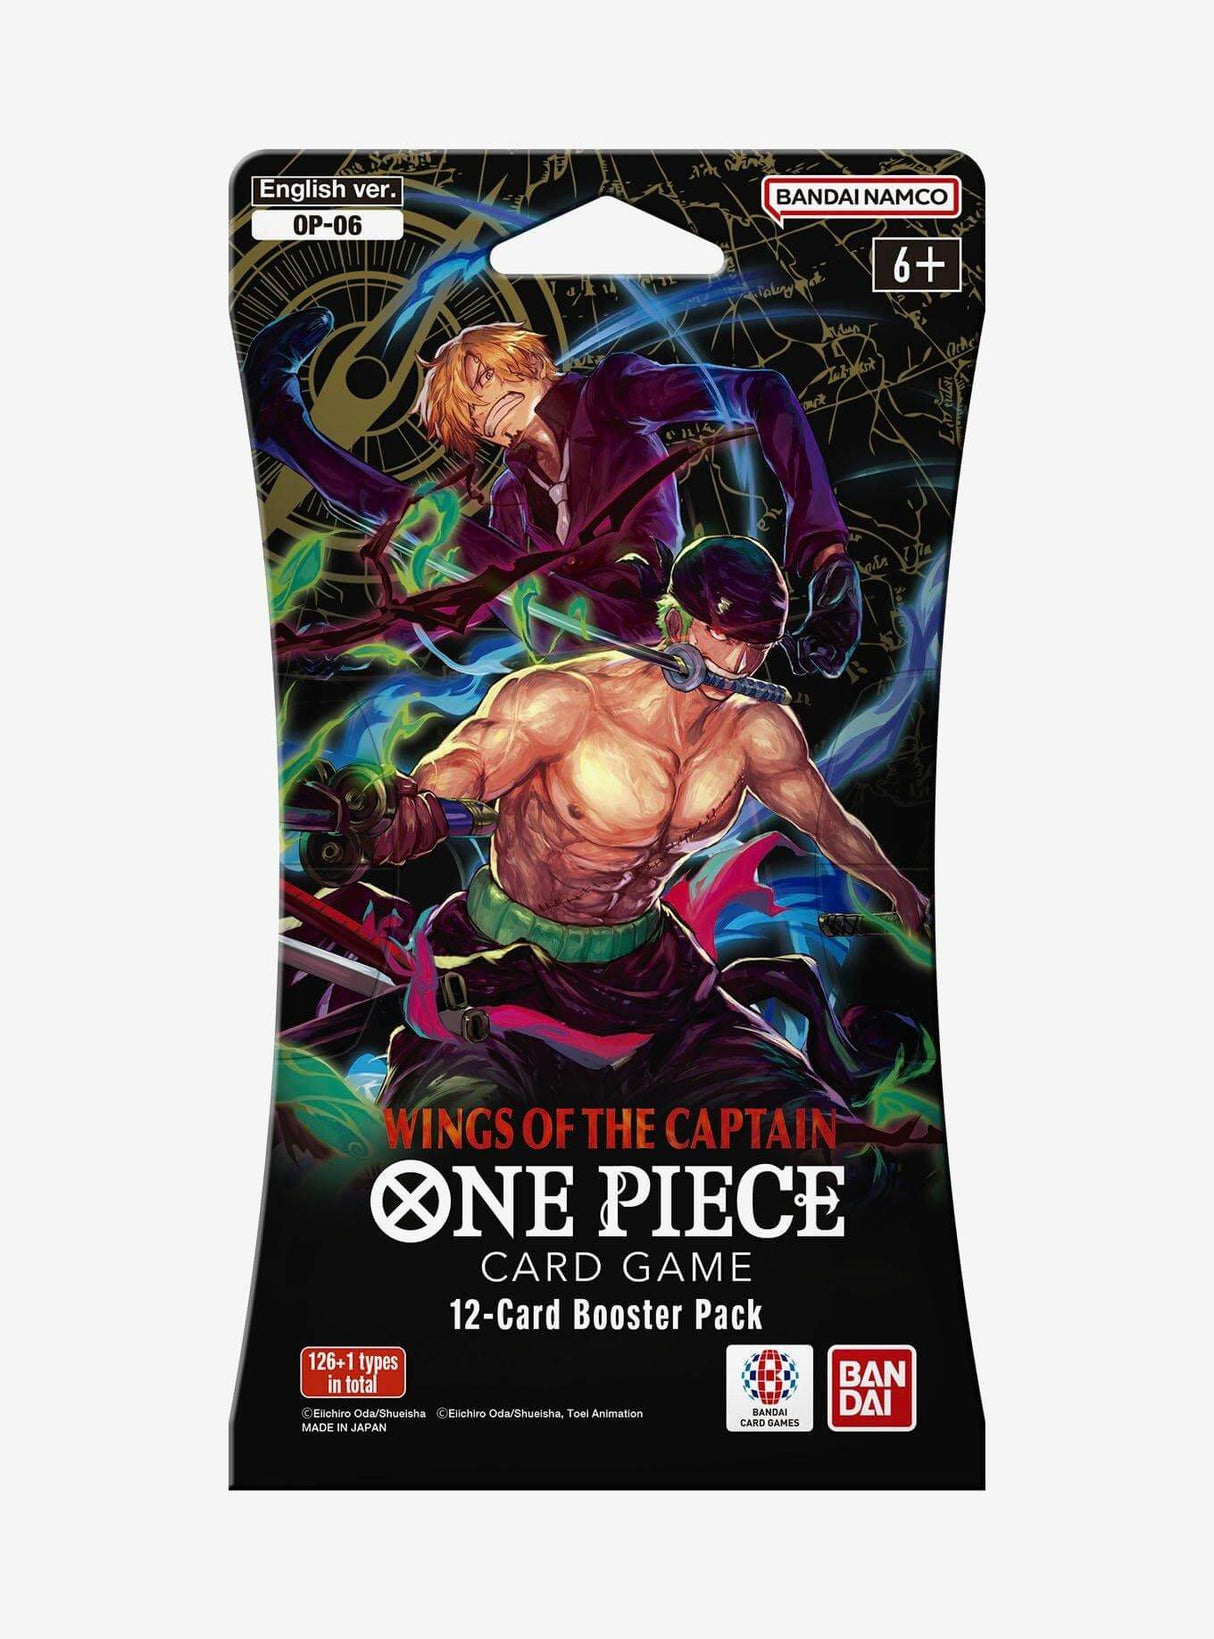 One Piece (OP-06): Wings of the Captain Sleeved Booster Pack